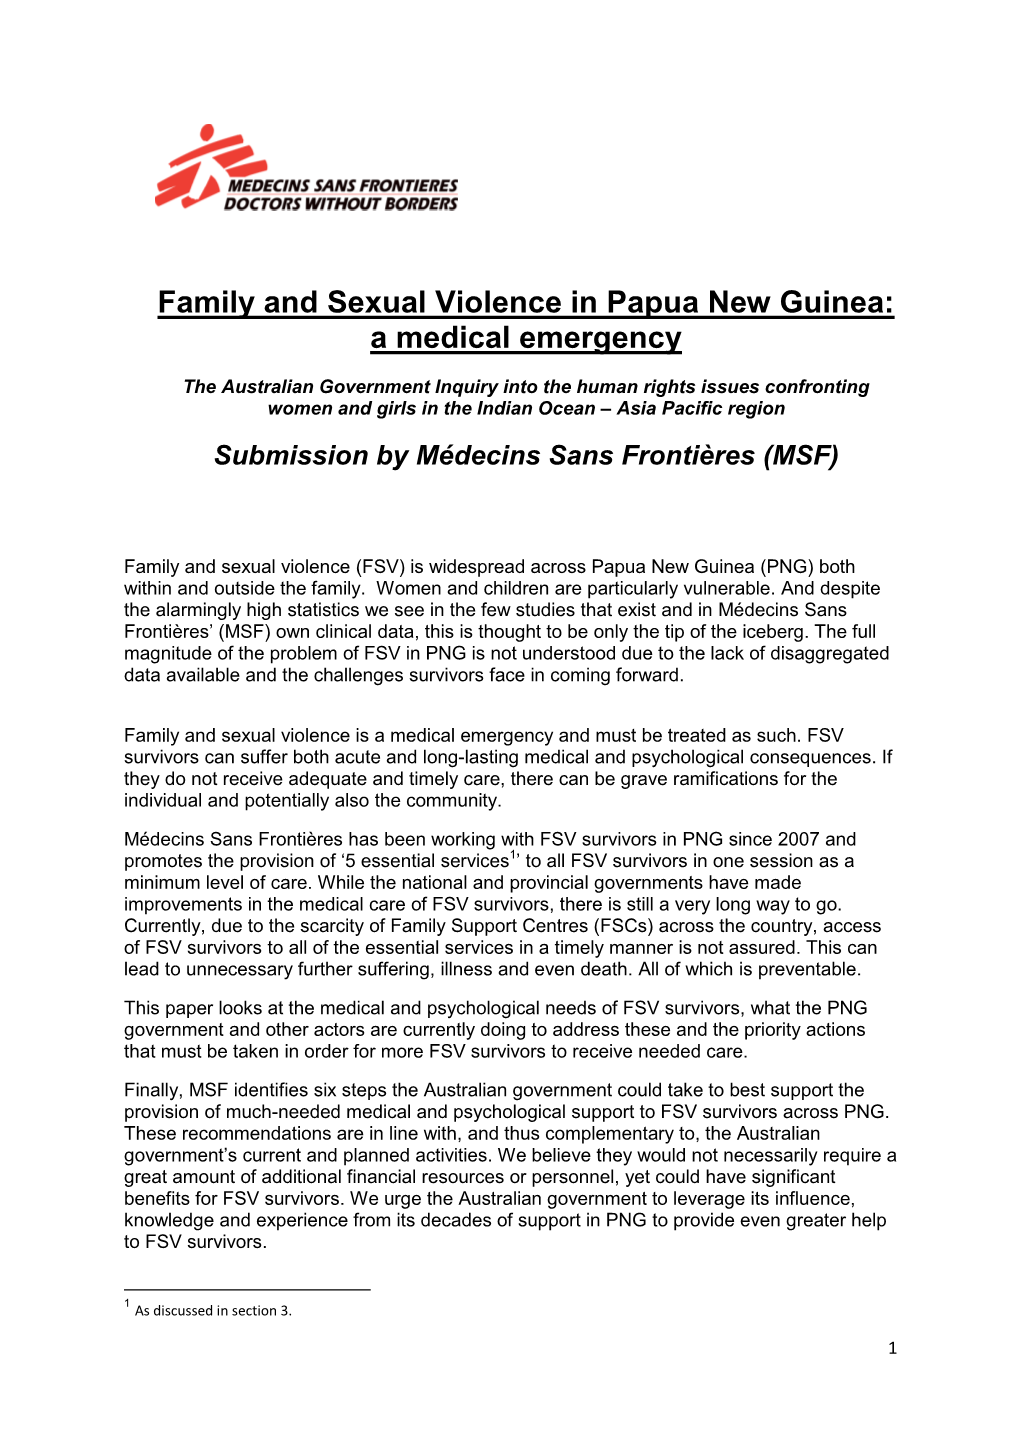 Family and Sexual Violence in Papua New Guinea: a Medical Emergency